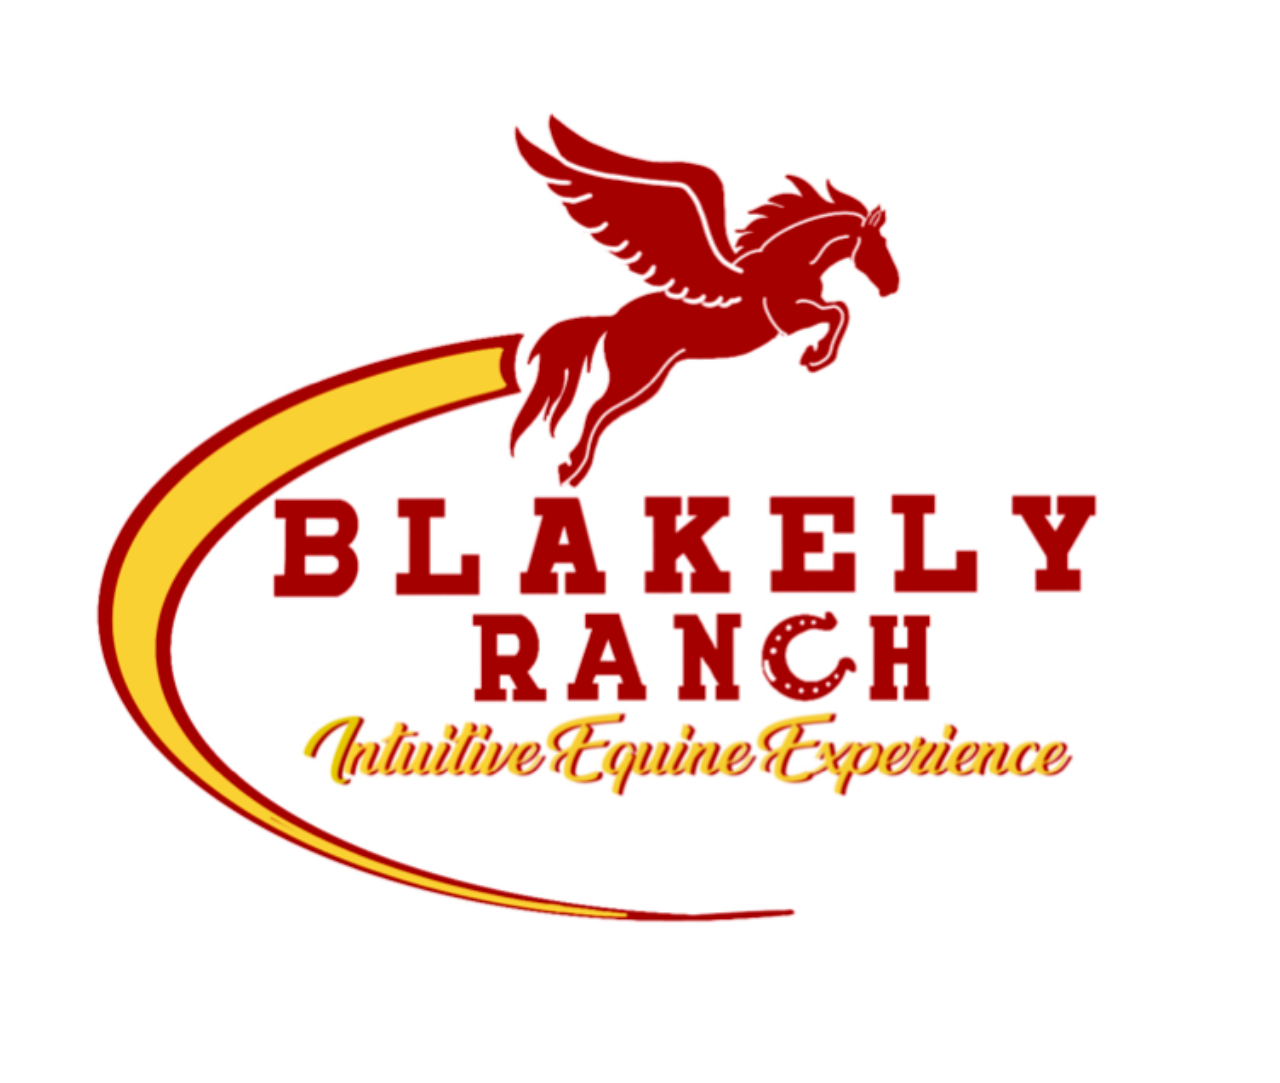 Blakely Ranch's web page